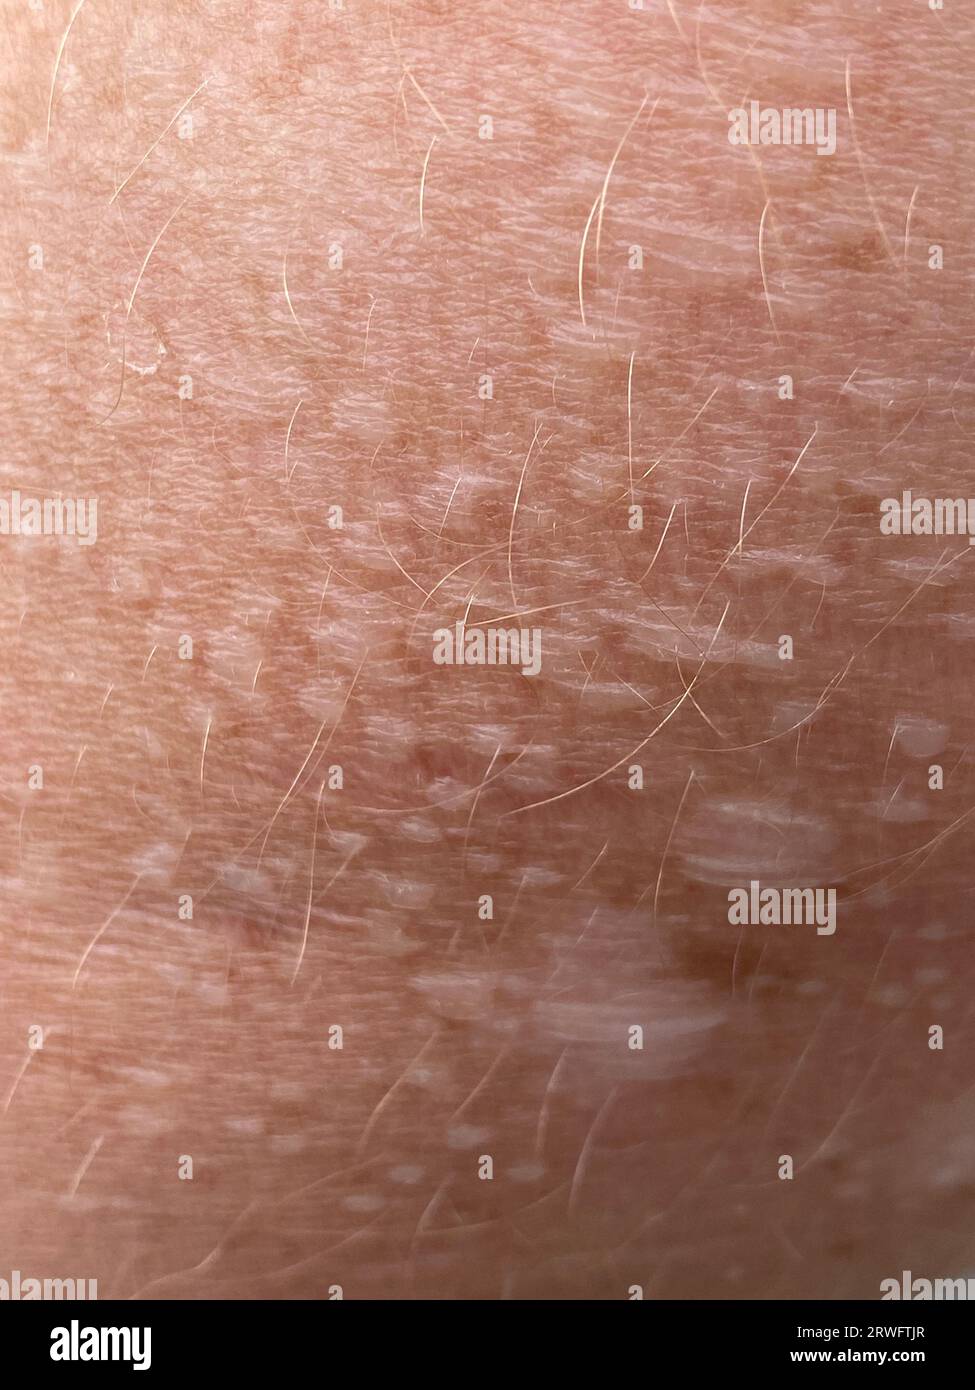 Close up on blistered skin damaged by sun exposure. Stock Photo